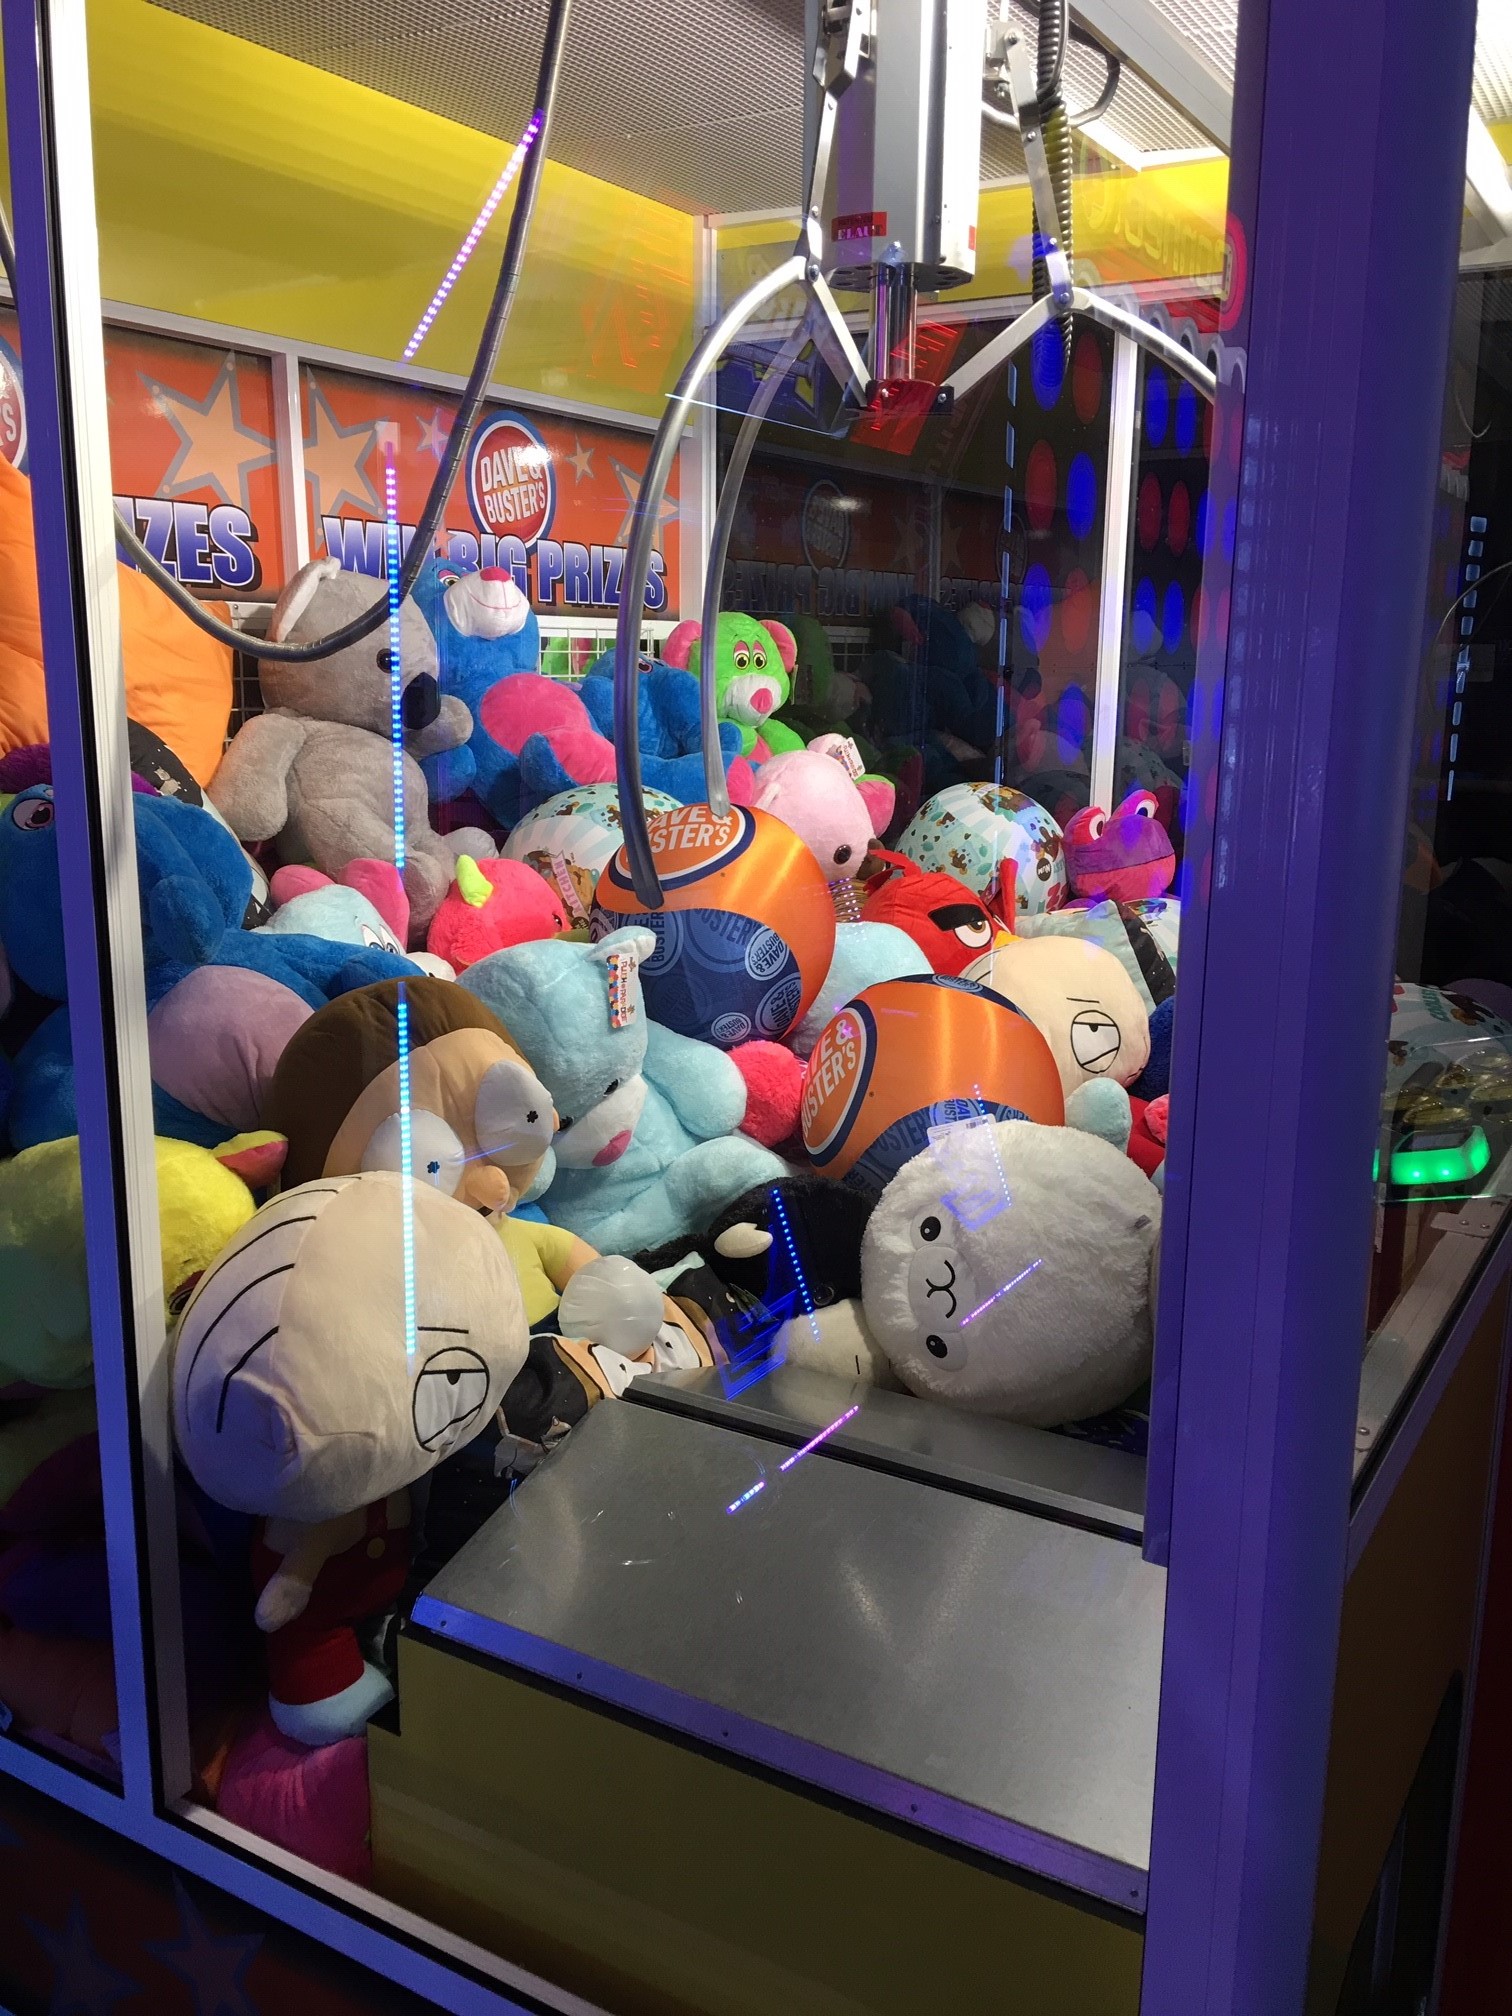 blog/artifacts/Dave and Busters 1.jpg